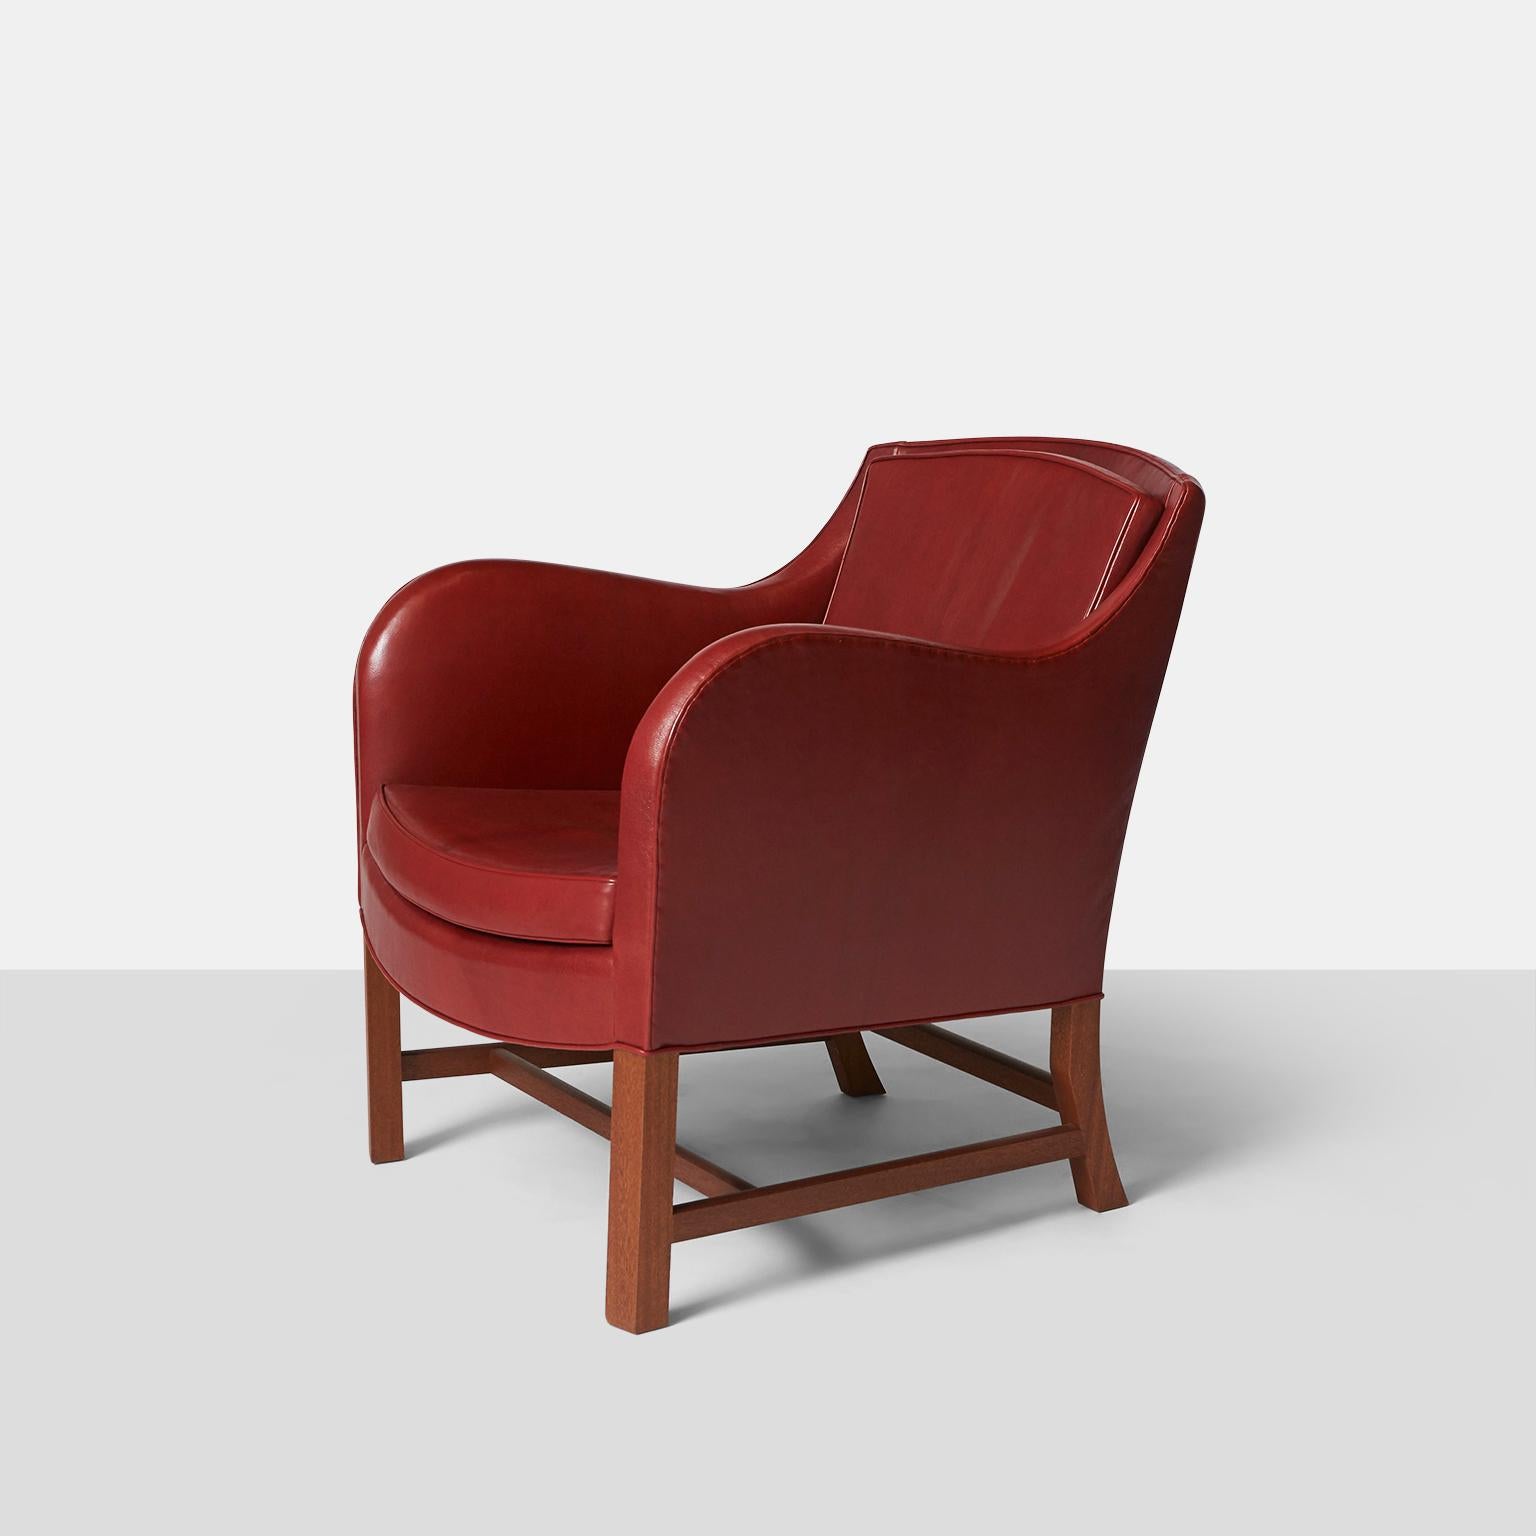 A “Mix” lounge chair by Kaare Klint made in the Rud Rasmussen factory. Upholstered in a deep cordovan leather with a mahogany frame. The top has a convex shape while the seat is concave. One of the last chairs made in the original factory with most